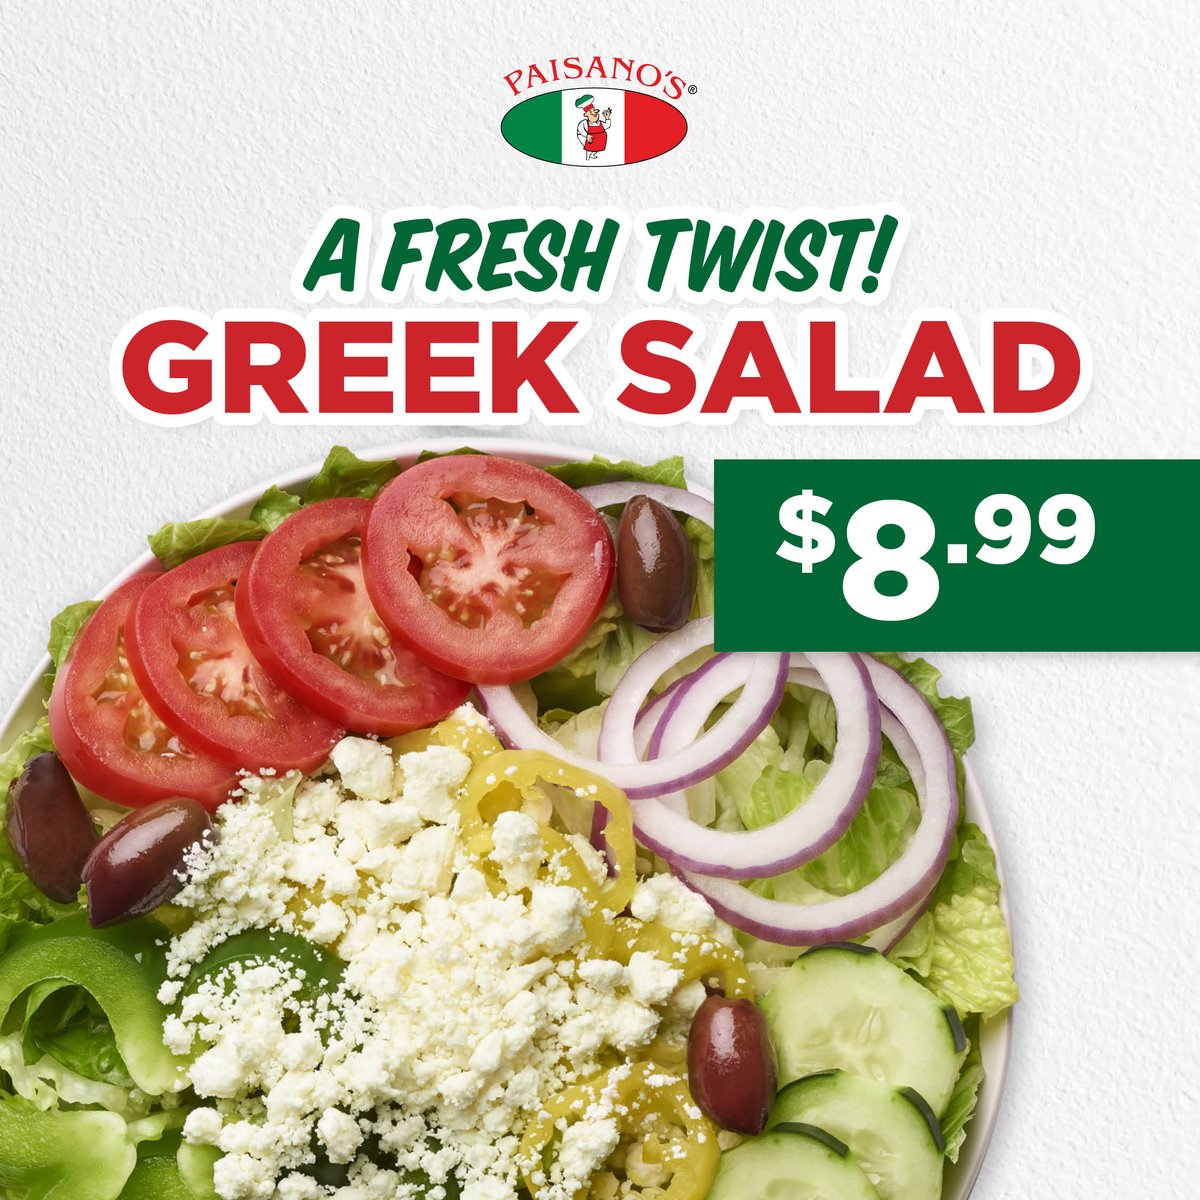 Our Greek Salad is a Fresh salad that you will love! 🥗 Made with crisp lettuce, feta, cucumber, tomato, banana pepper, green pepper, Kalamata olives, red onion & house dressing; our Greek Salad is the way to go!🥗 Order now 📲 PaisanosPizza.com